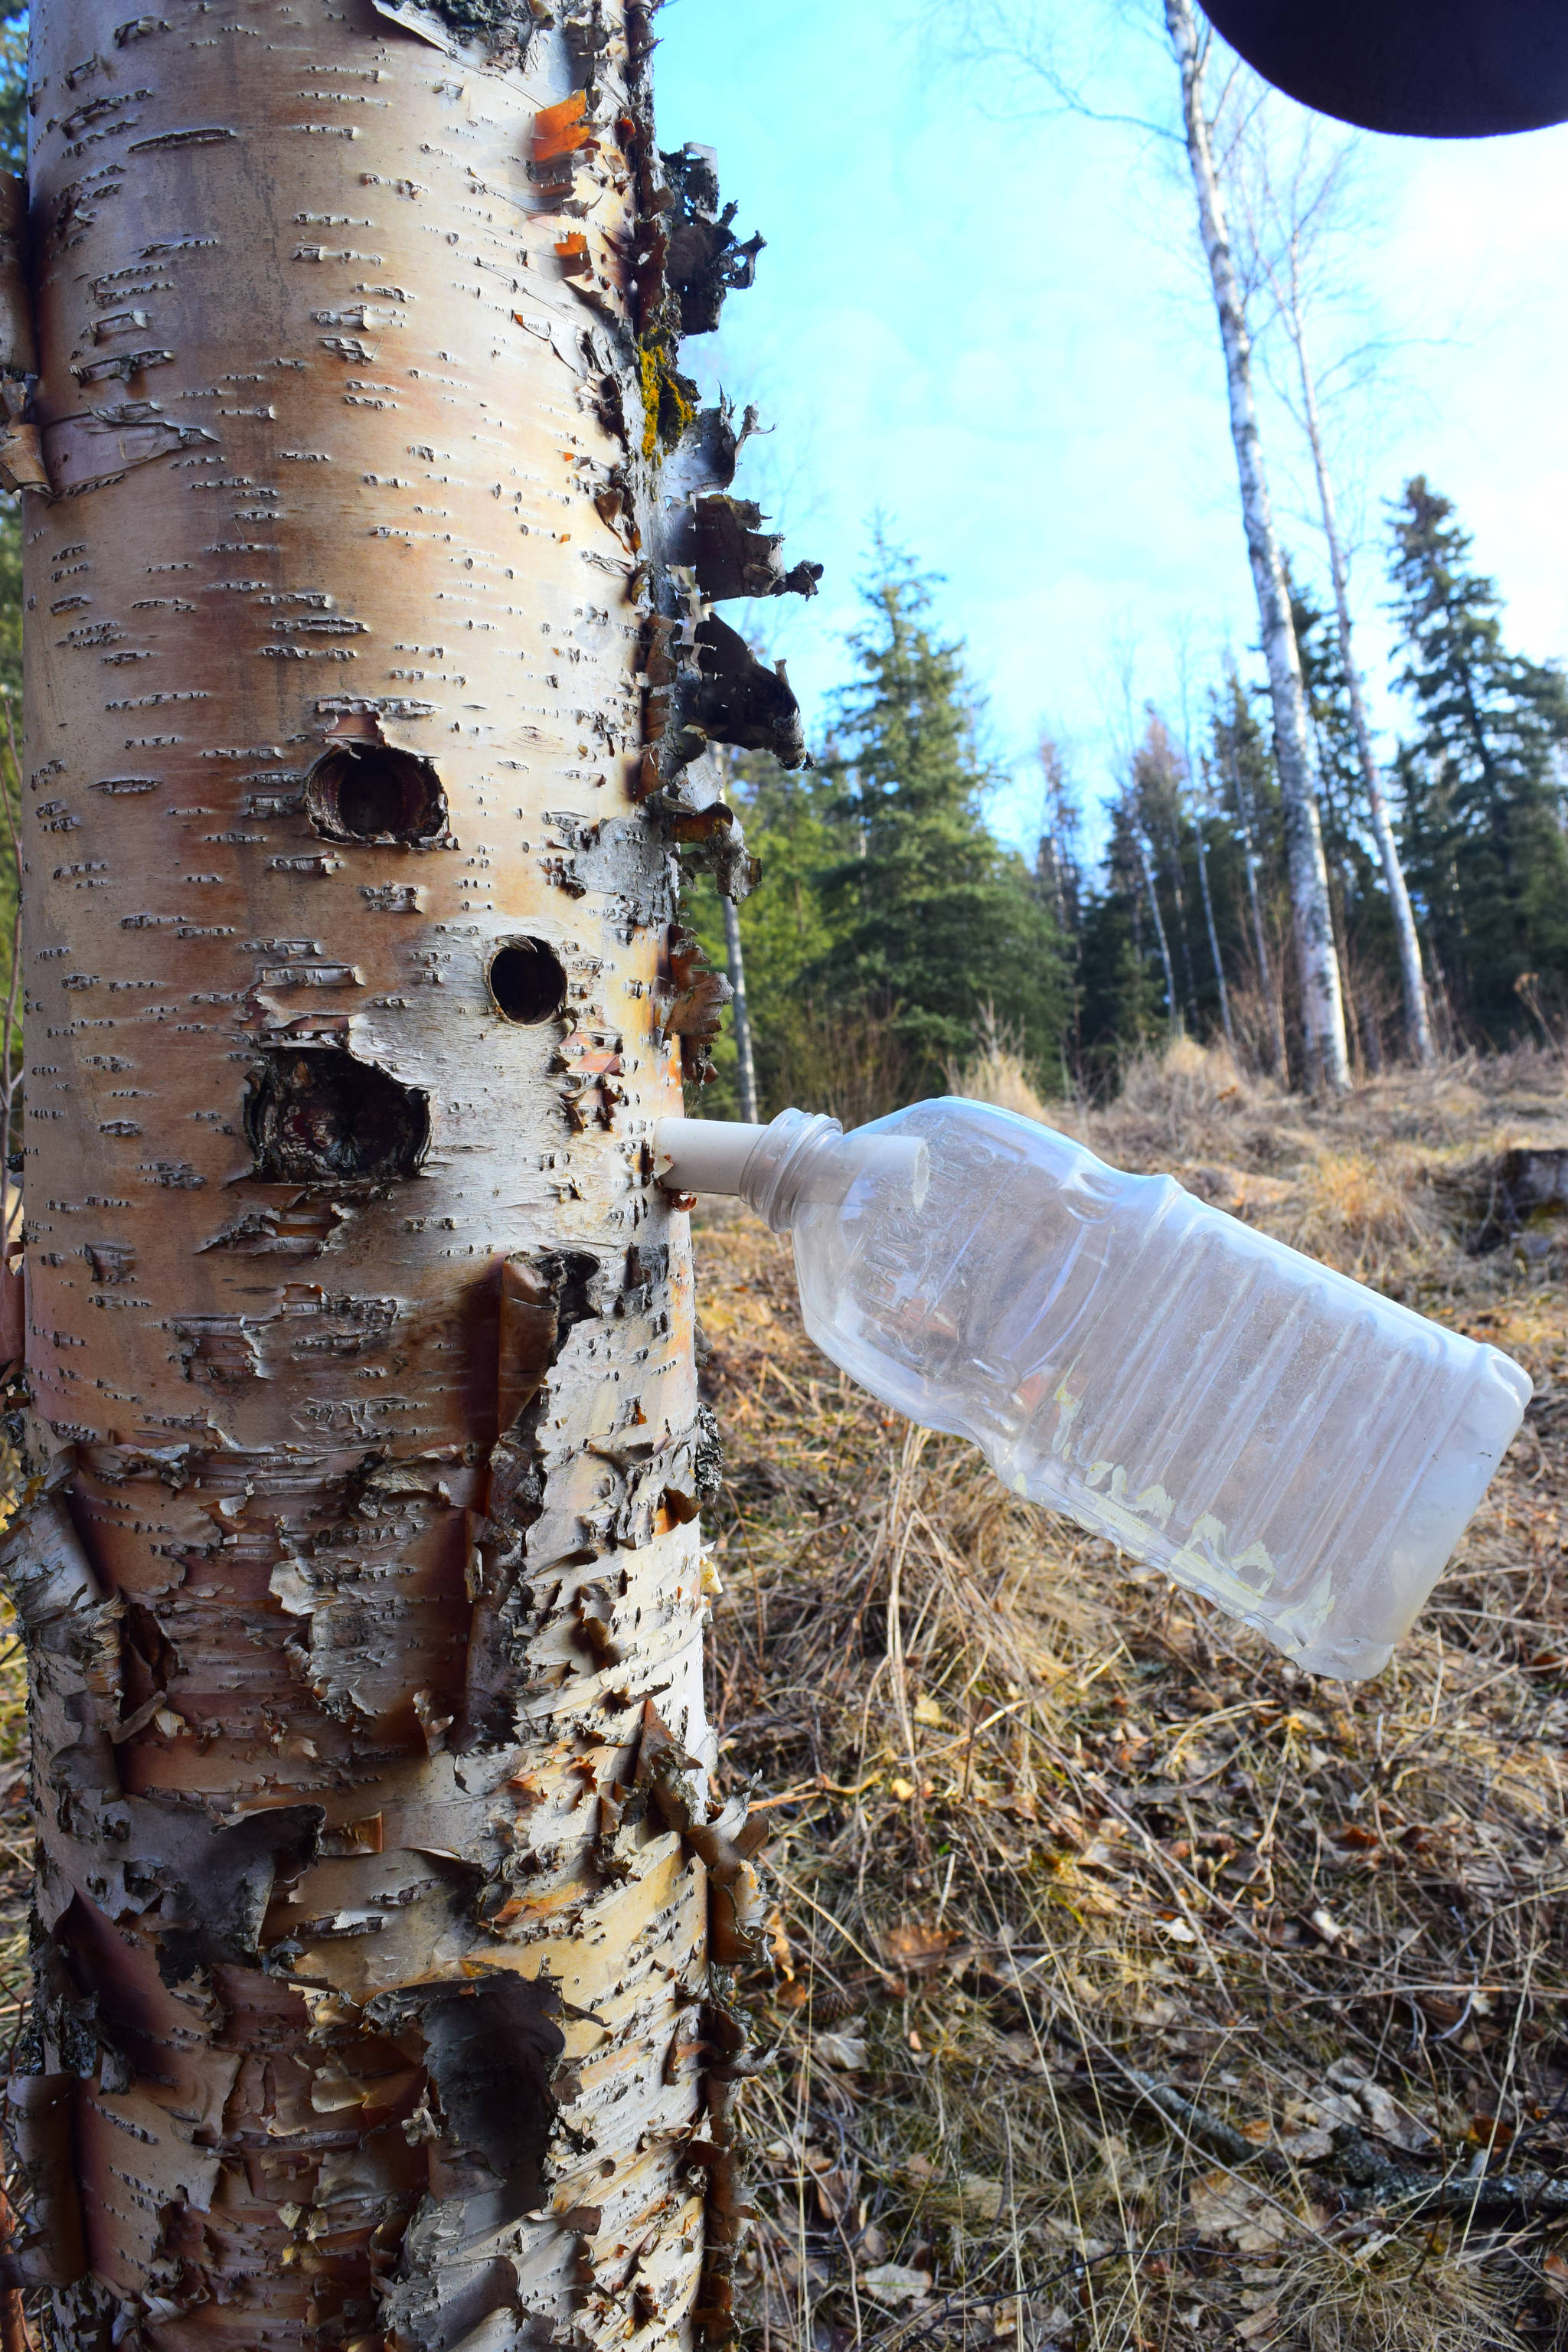 A plastic bottle hangs from a spiel to collect birch sap. (Photo by Jennifer Tarnacki)